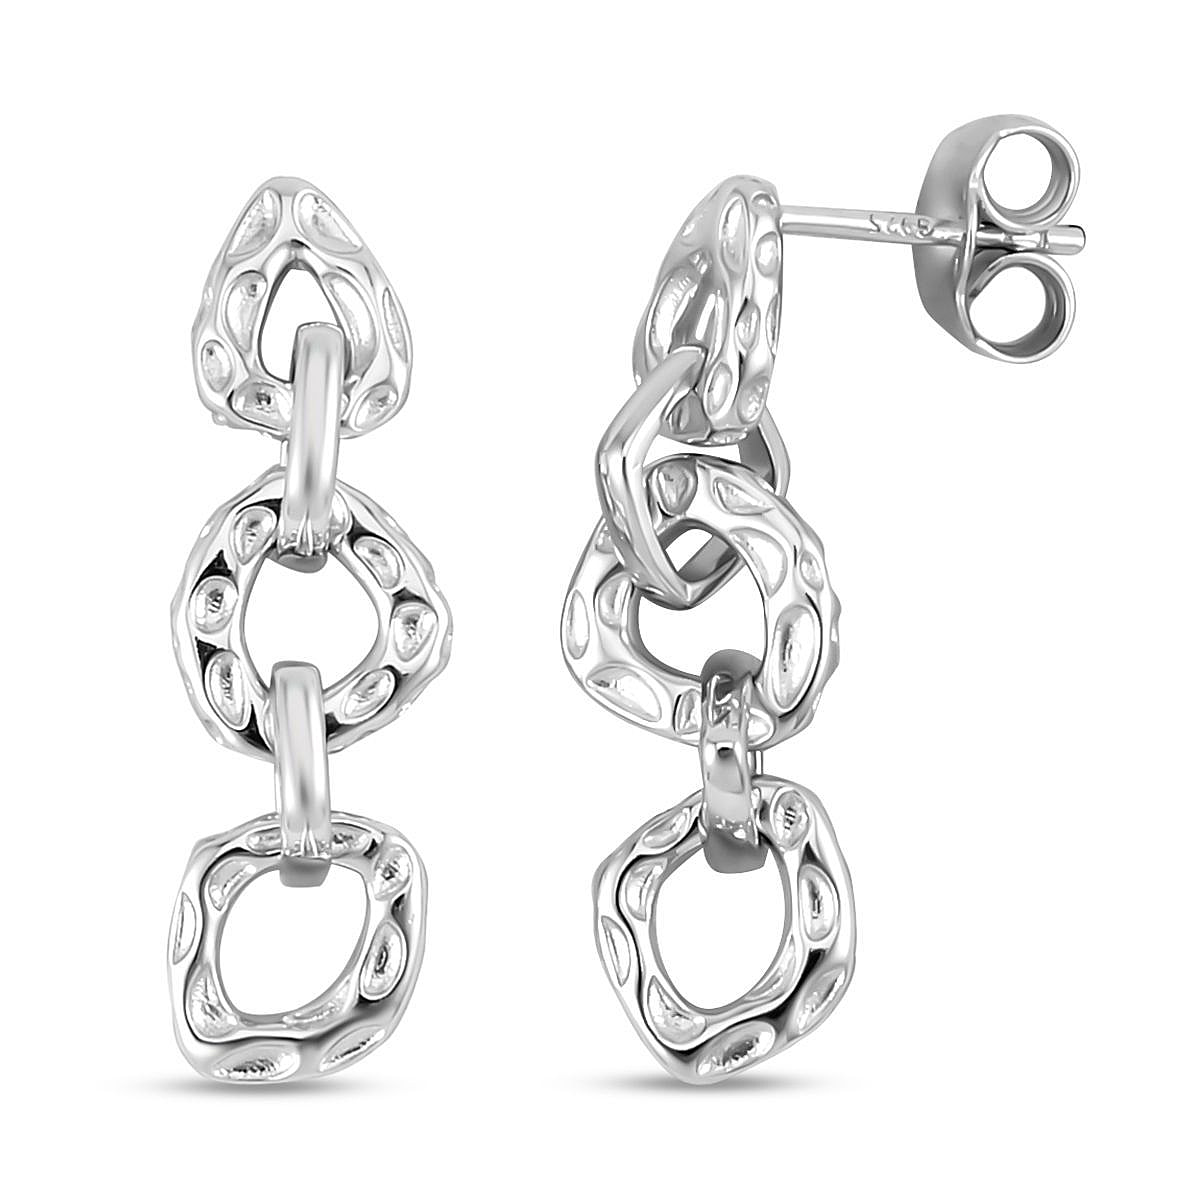 Rachel Galley Versa Collection - Rhodium Overlay Sterling Silver Dangle Earrings